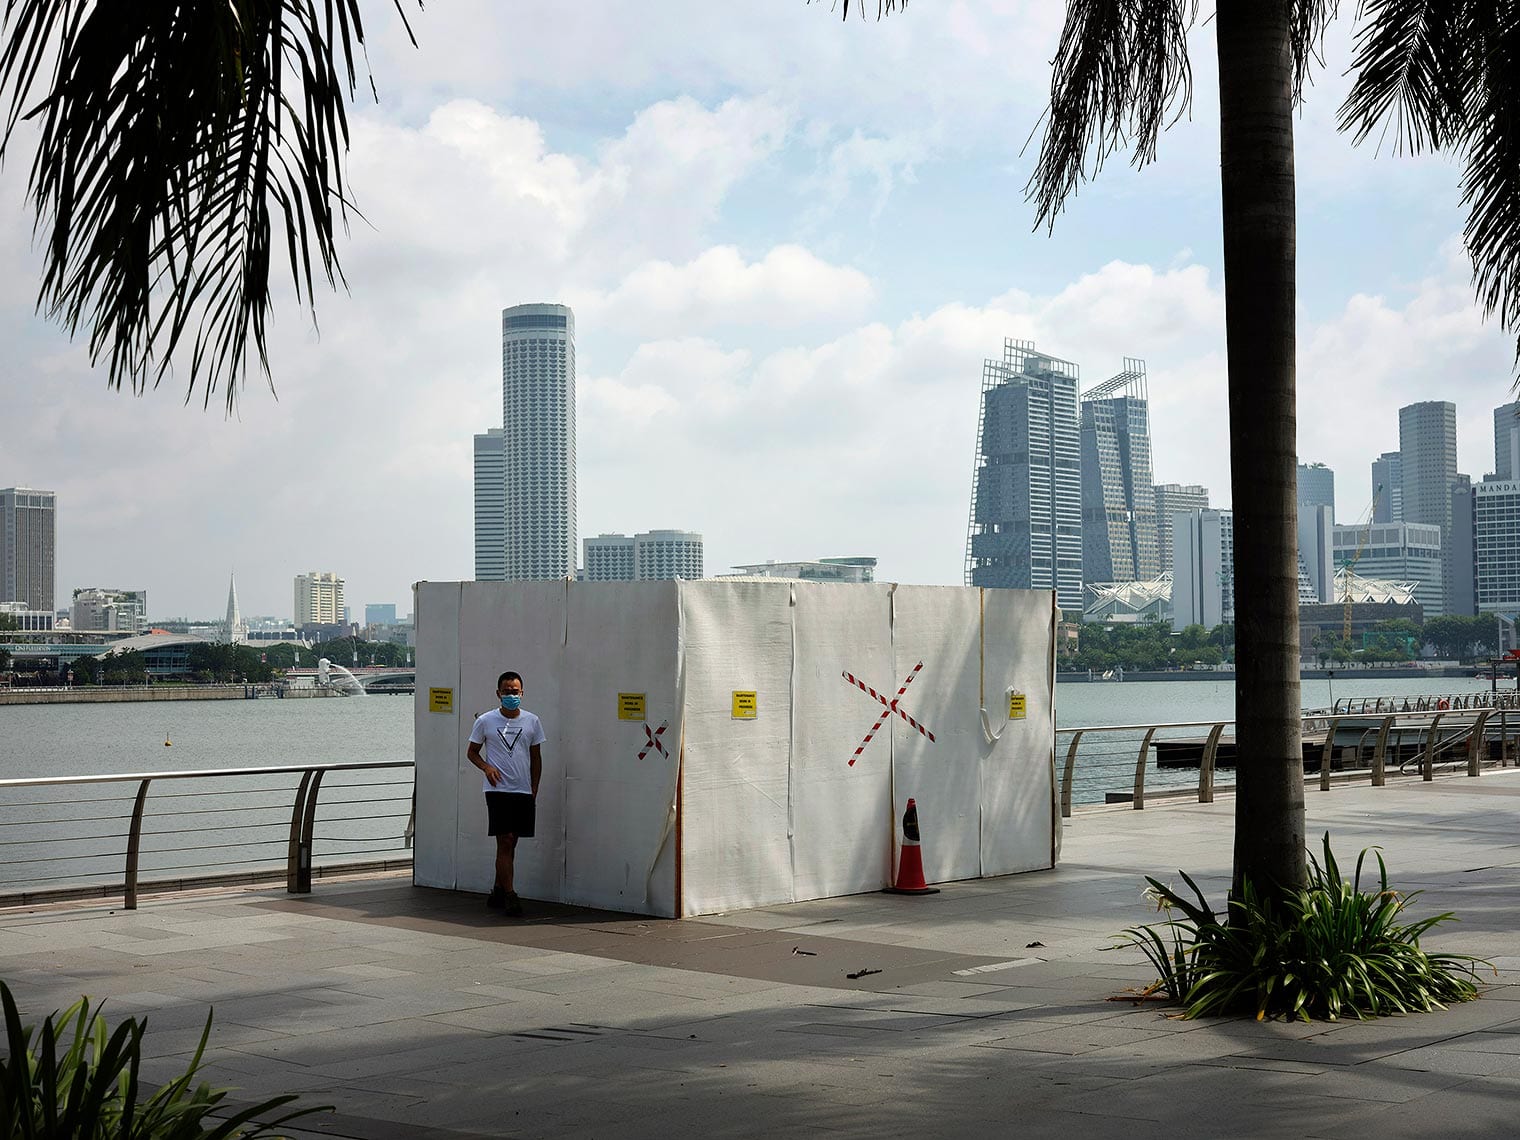 A lone masked person stands before a taped-off small building by the water in Singapore